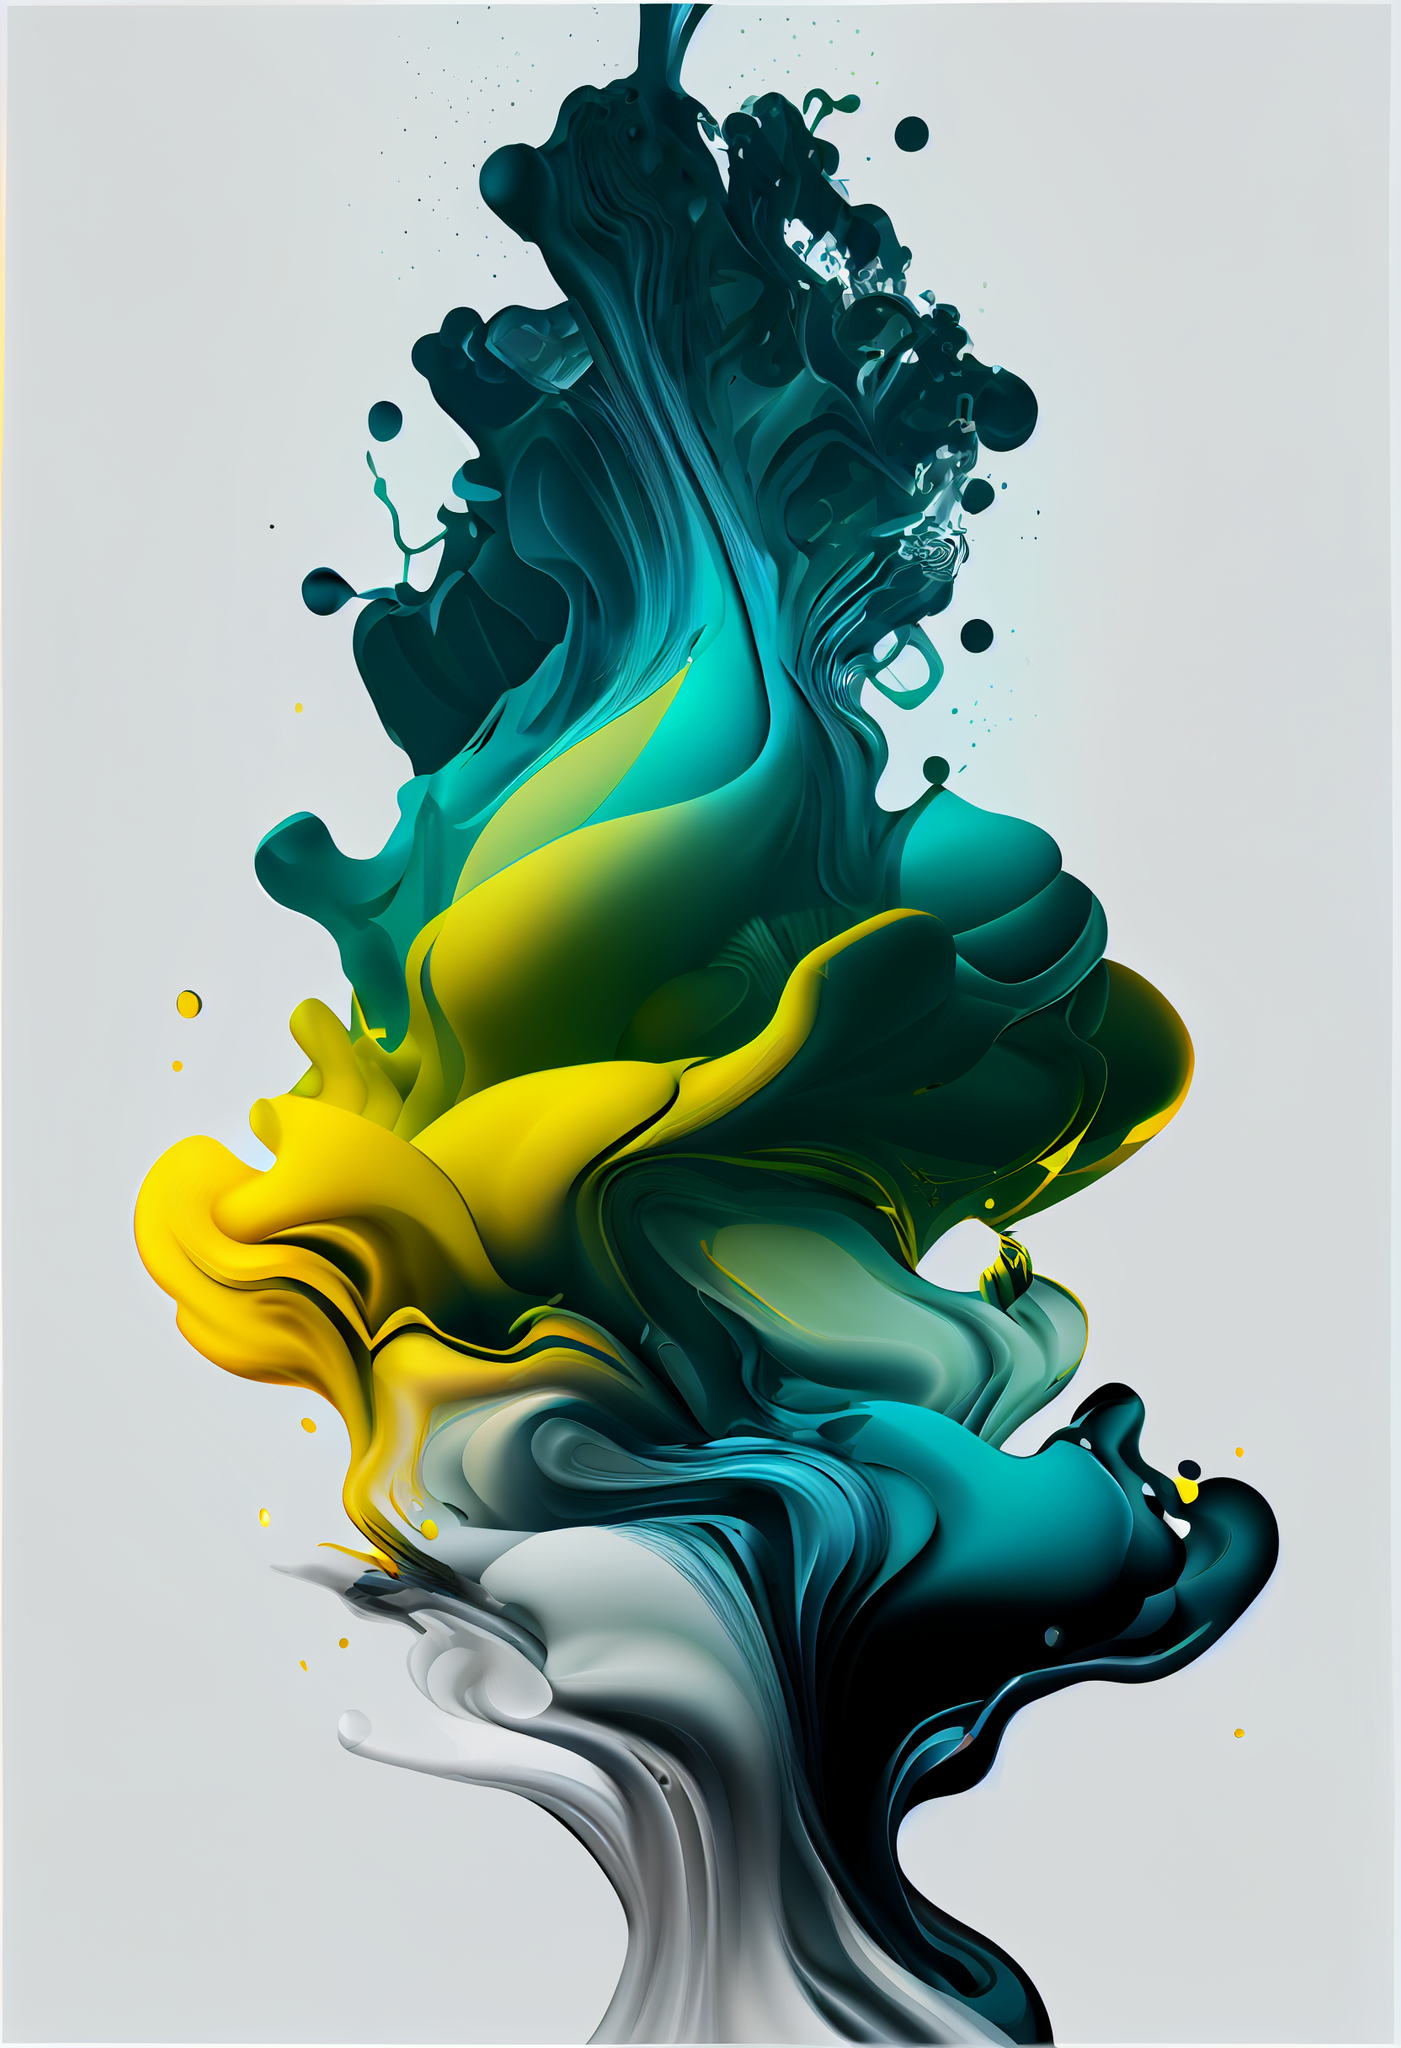 Teal Serenity: A Minimalistic Airbrush Fluid Print in Hues of Blue, Green, Yellow, Grey, and White